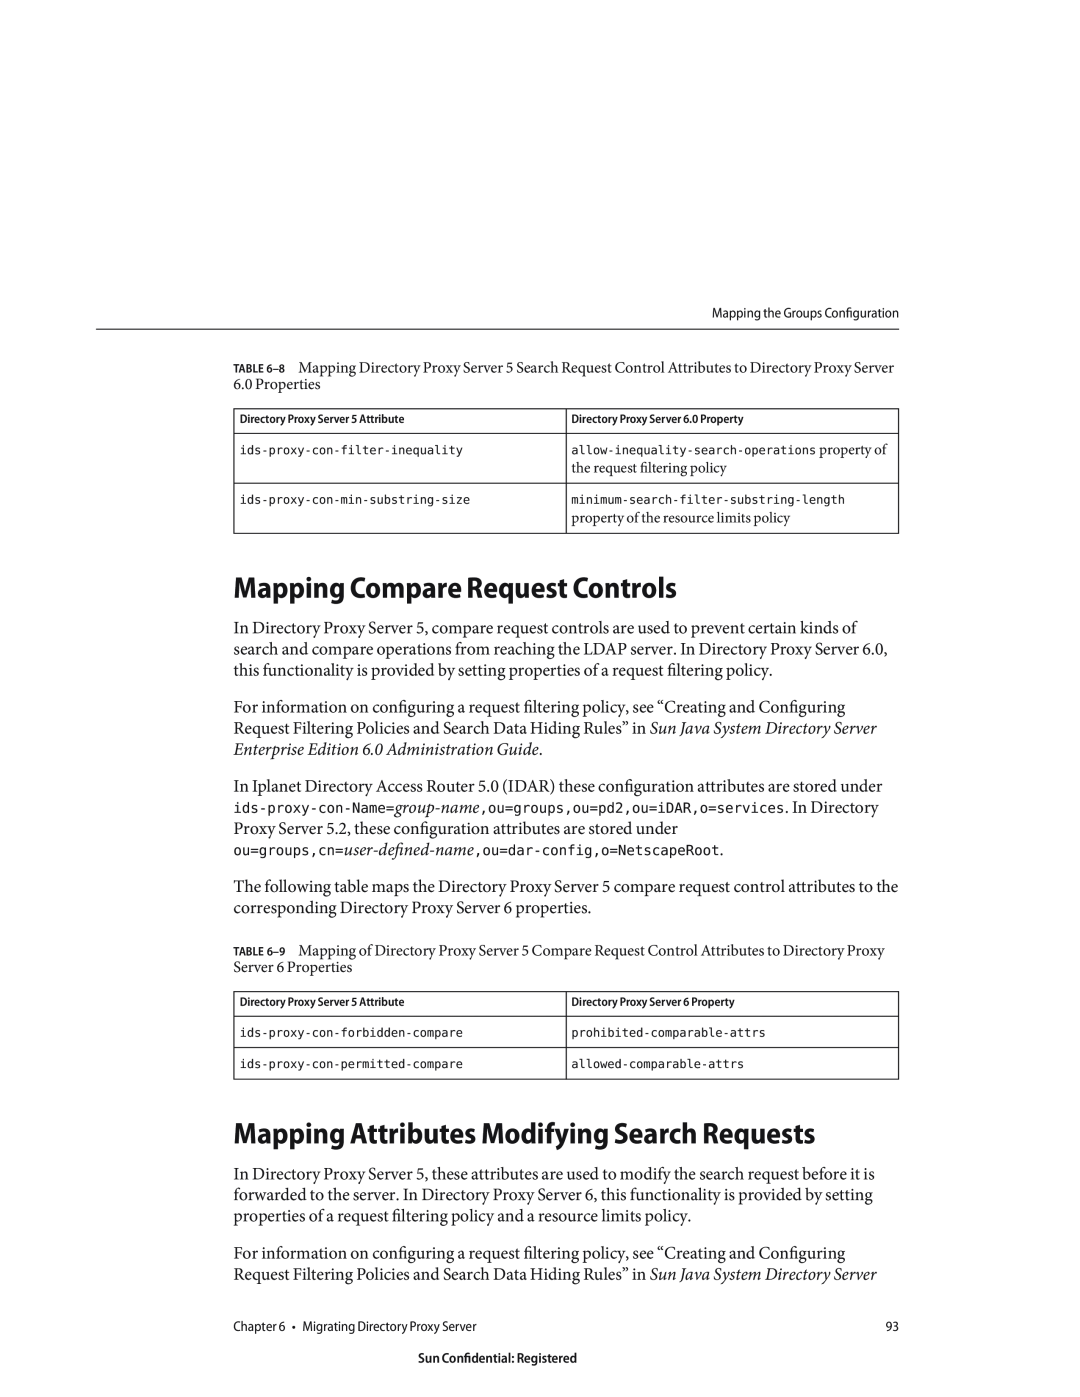 Sun Microsystems 8190994 manual Mapping Compare Request Controls, Mapping Attributes Modifying Search Requests 